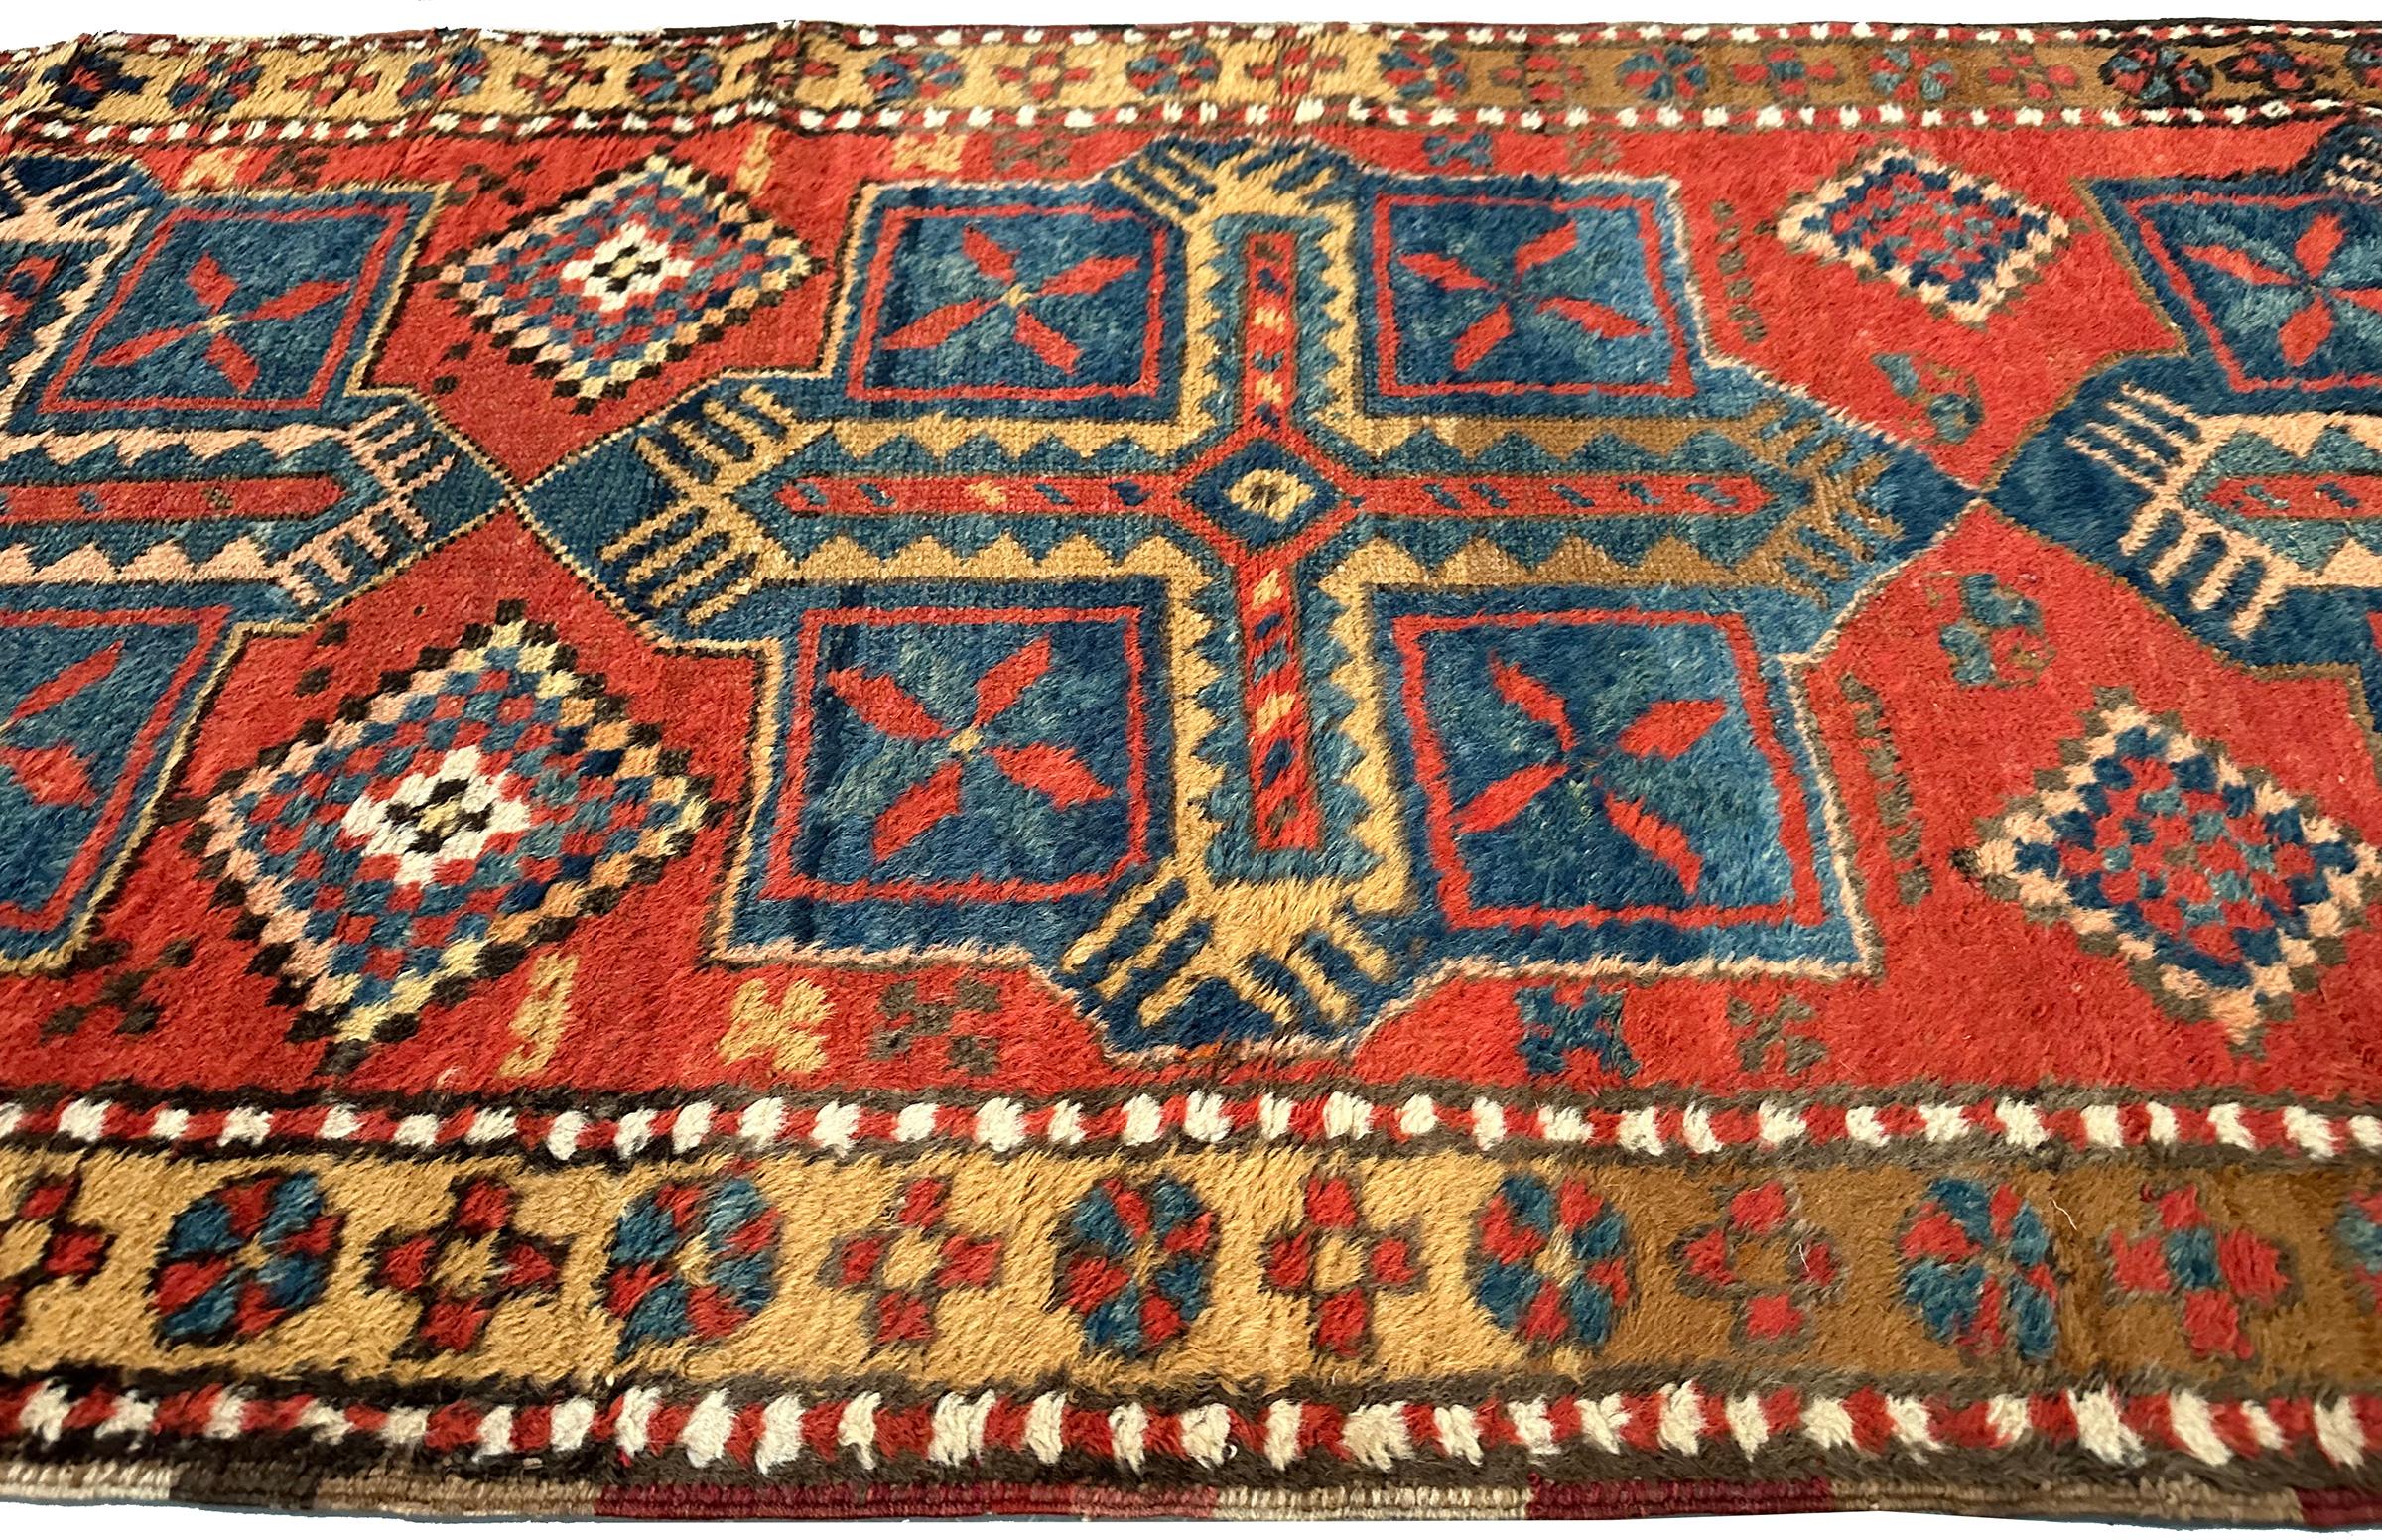 Antique Geometric Tribal Rug Handmade Runner Rug 1900 89cm x 262cm 3x9ft In Good Condition For Sale In New York, NY